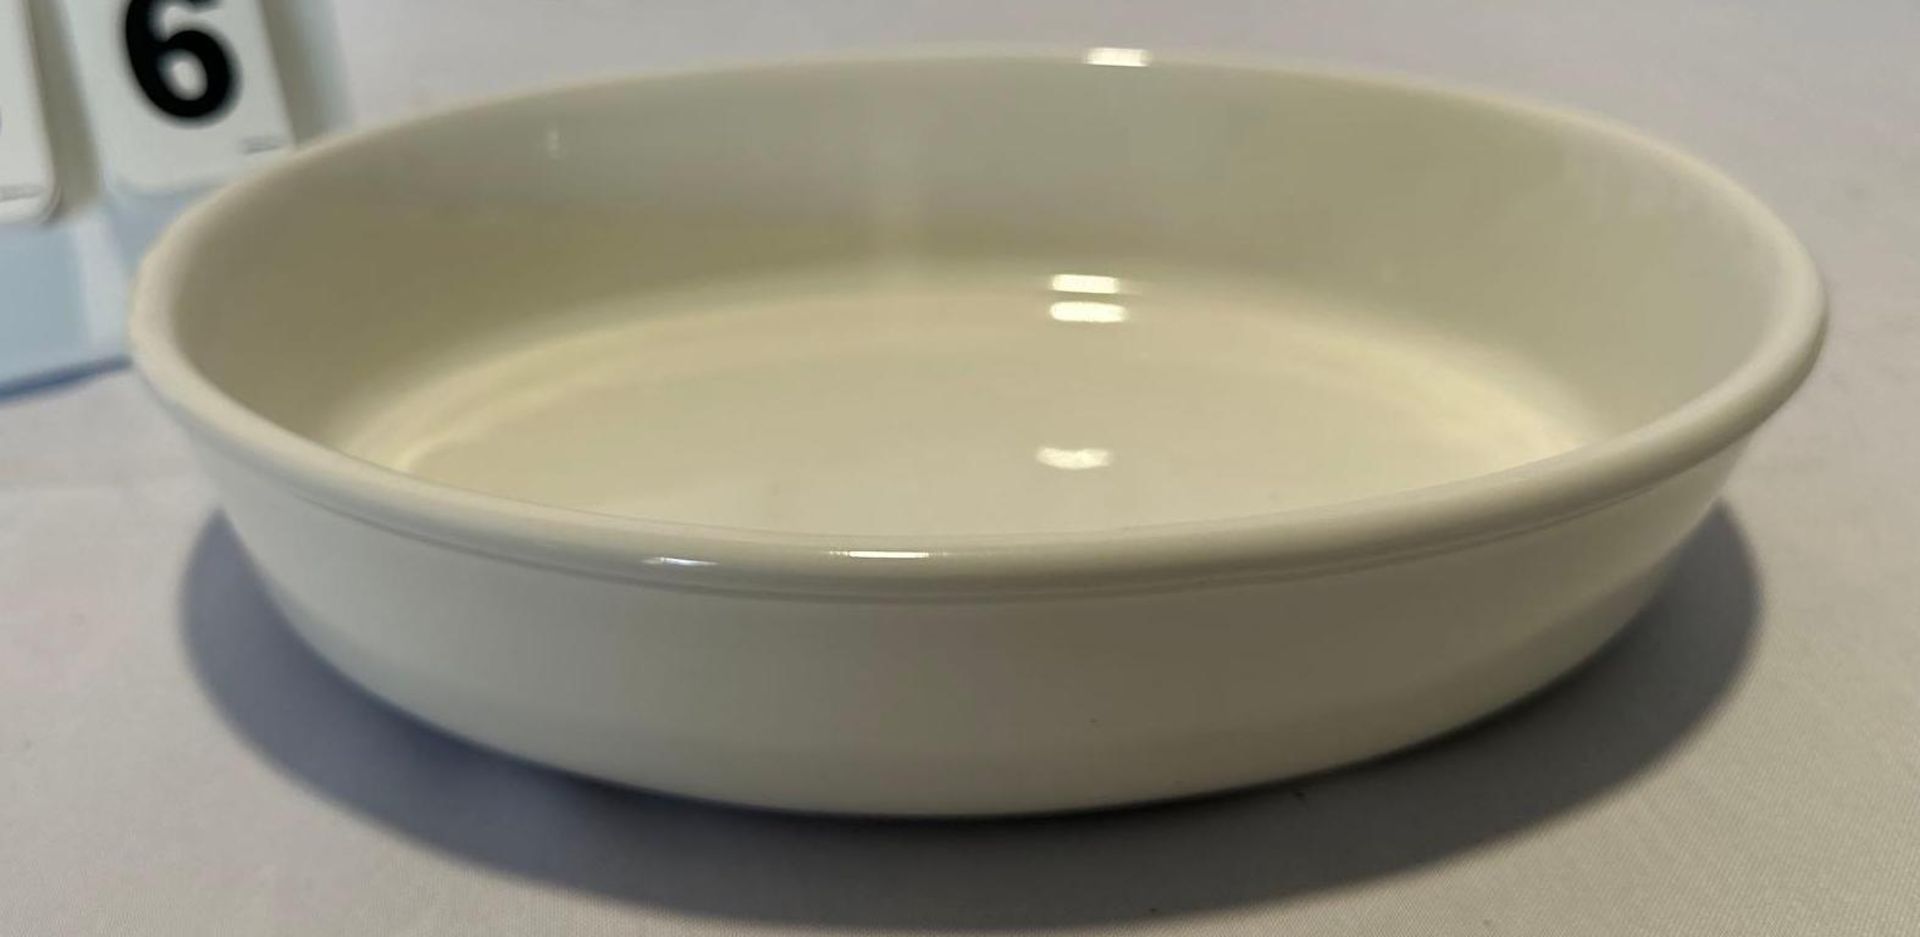 Small Casserole Dish Ikea 10 x 8 x 2 (NO crate charges)